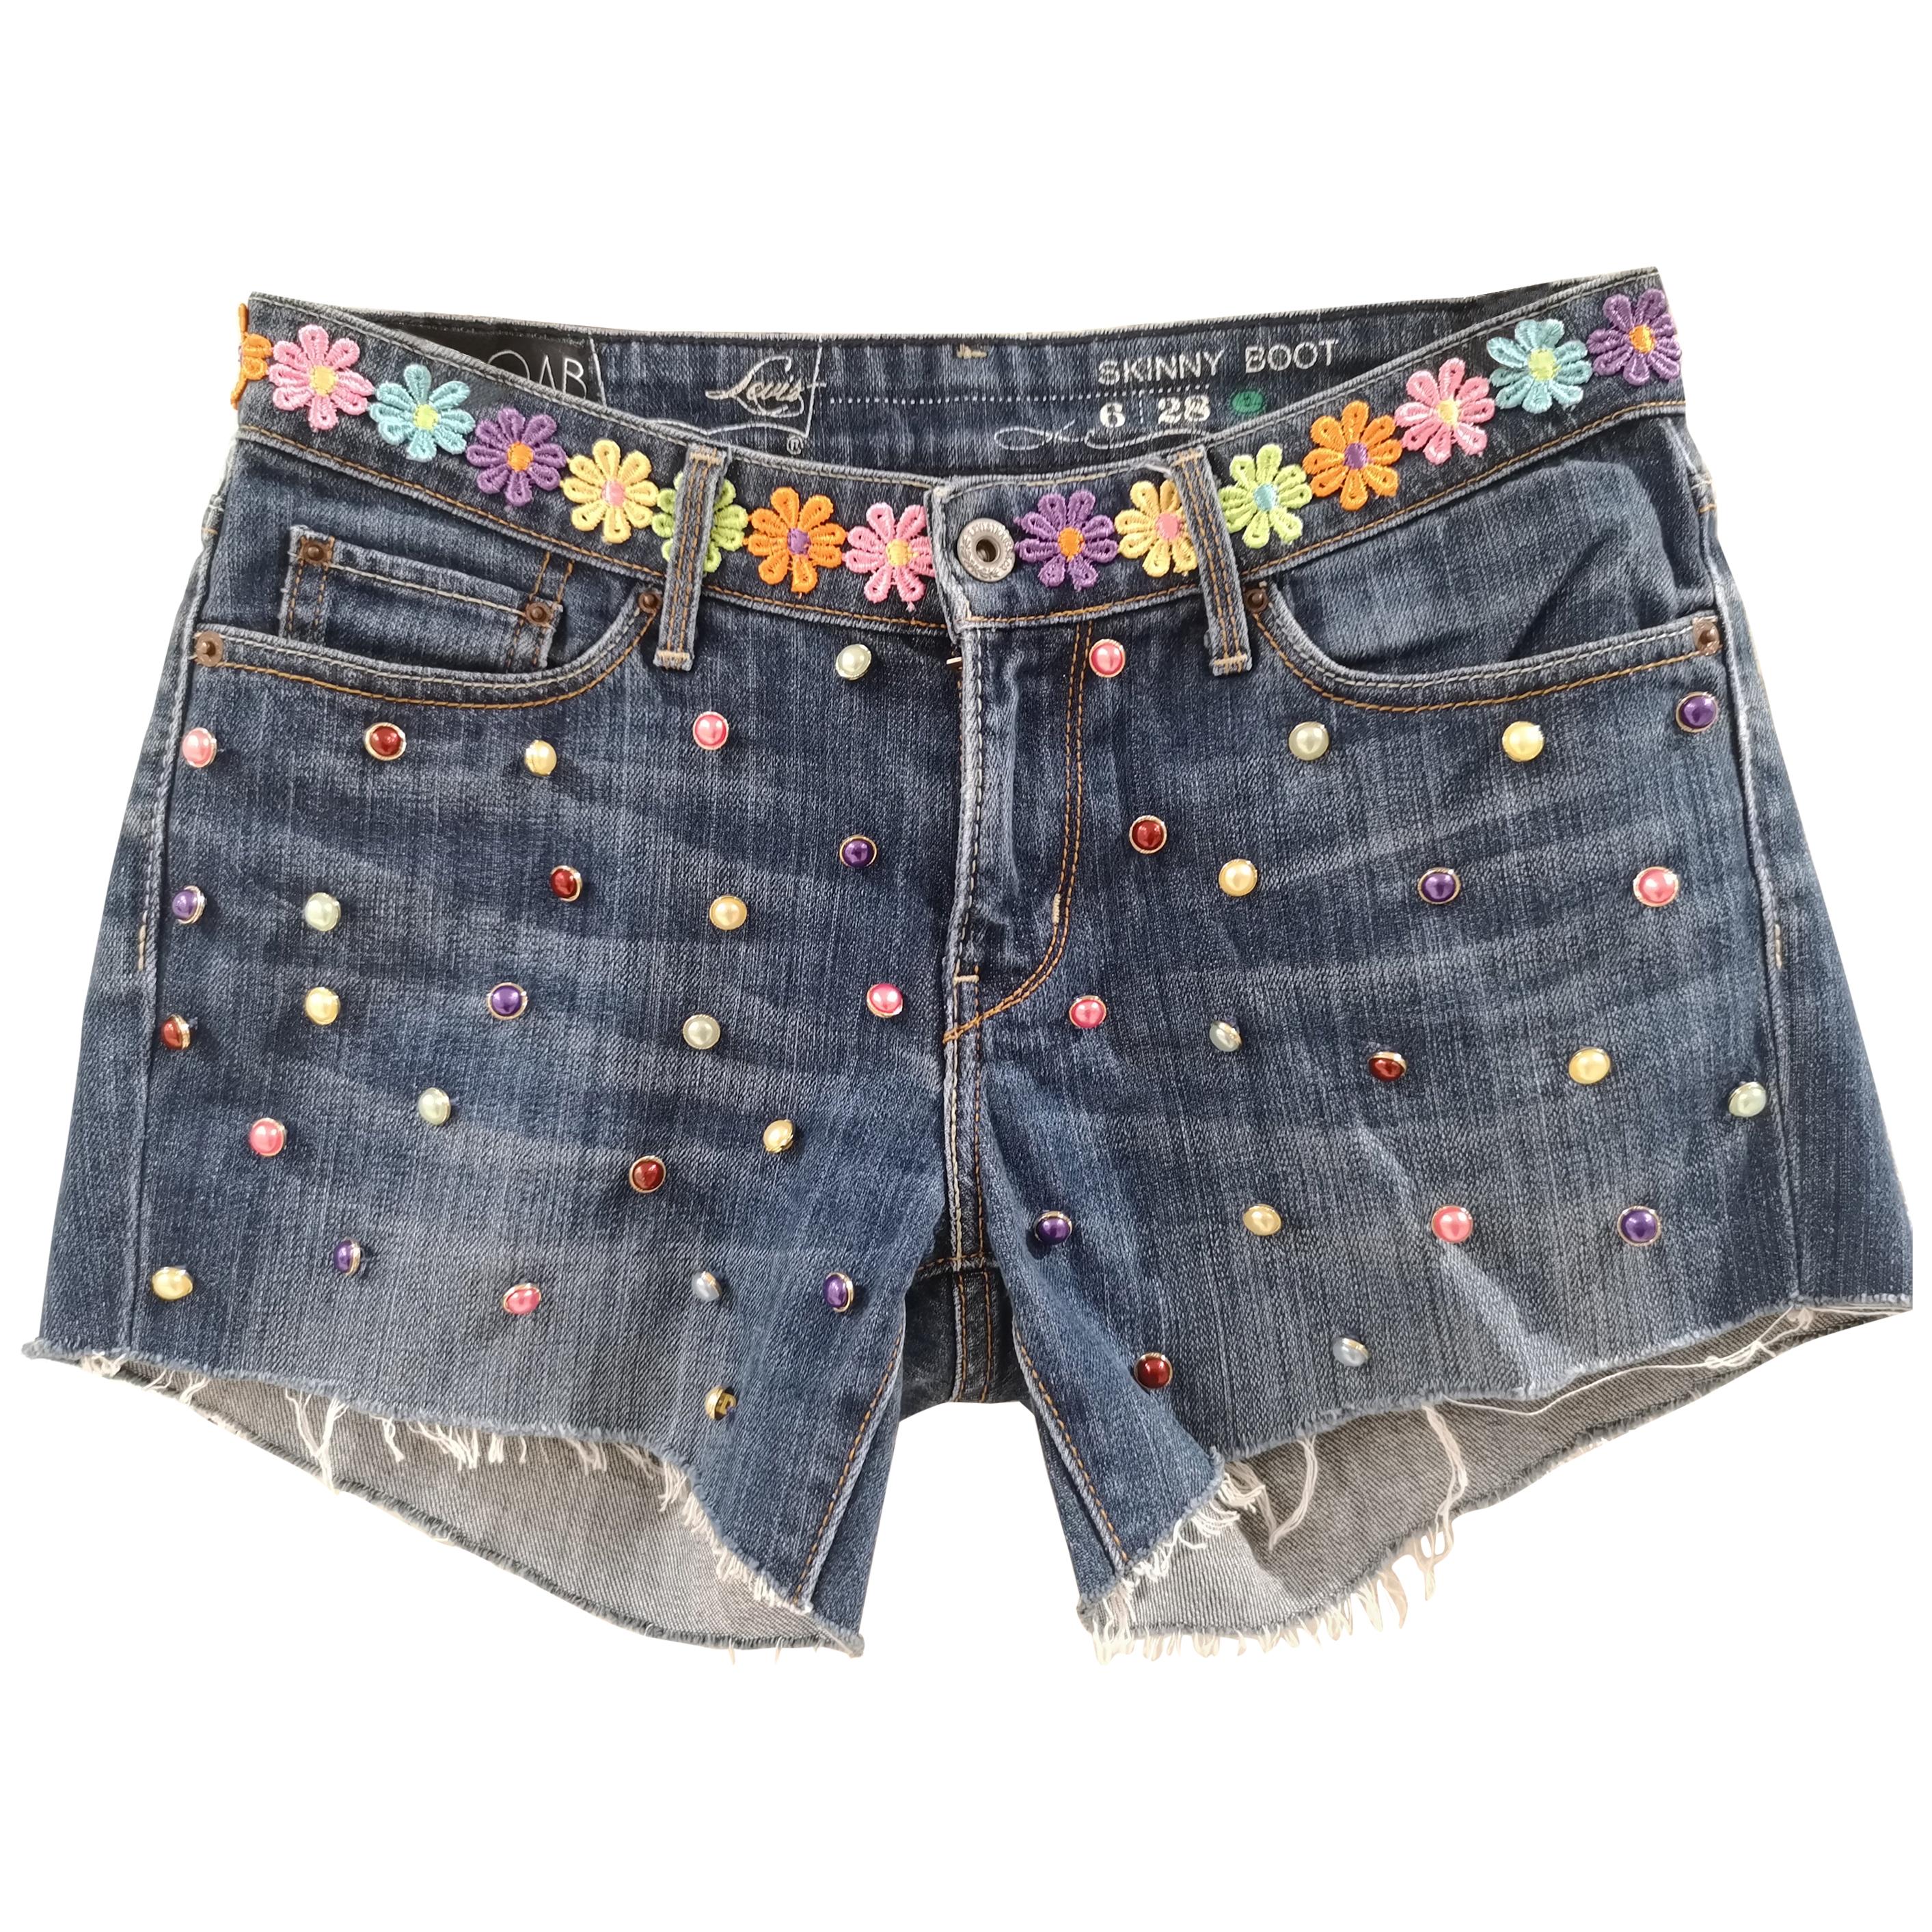 SOAB blue denim cotton flowers and beads shorts